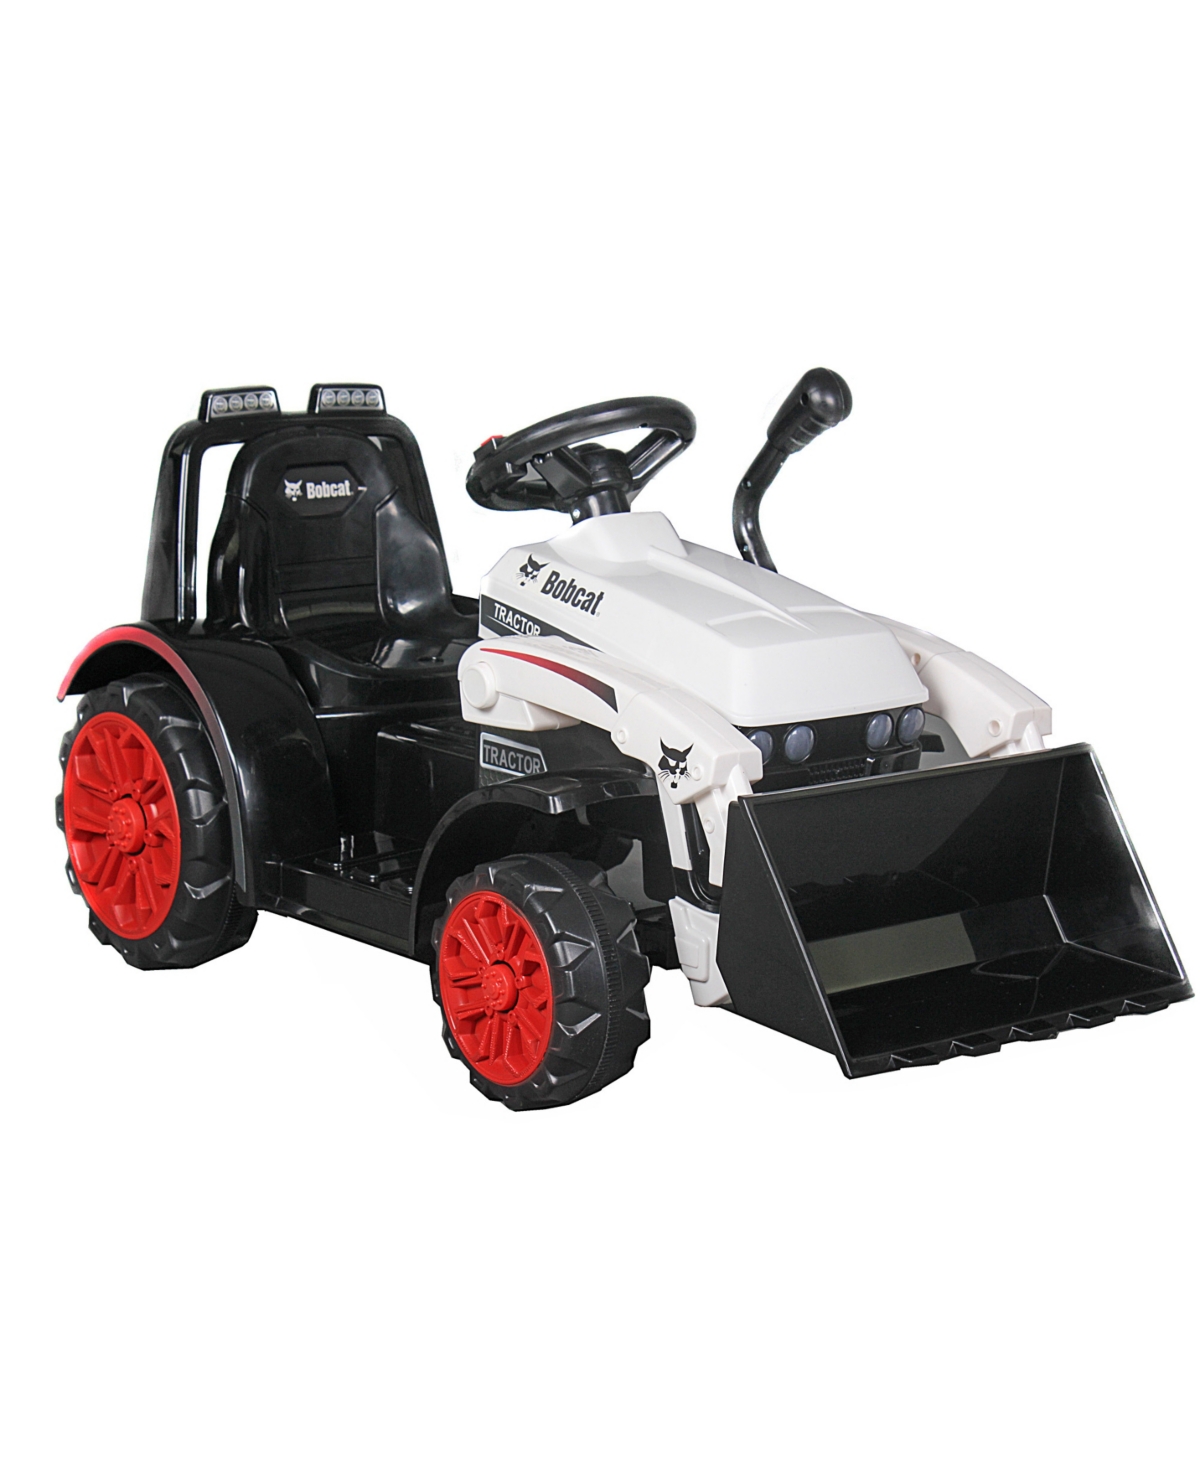 Best Ride On Cars Kids' Bobcat Construction Tractor 6v Powered Ride-on In Black